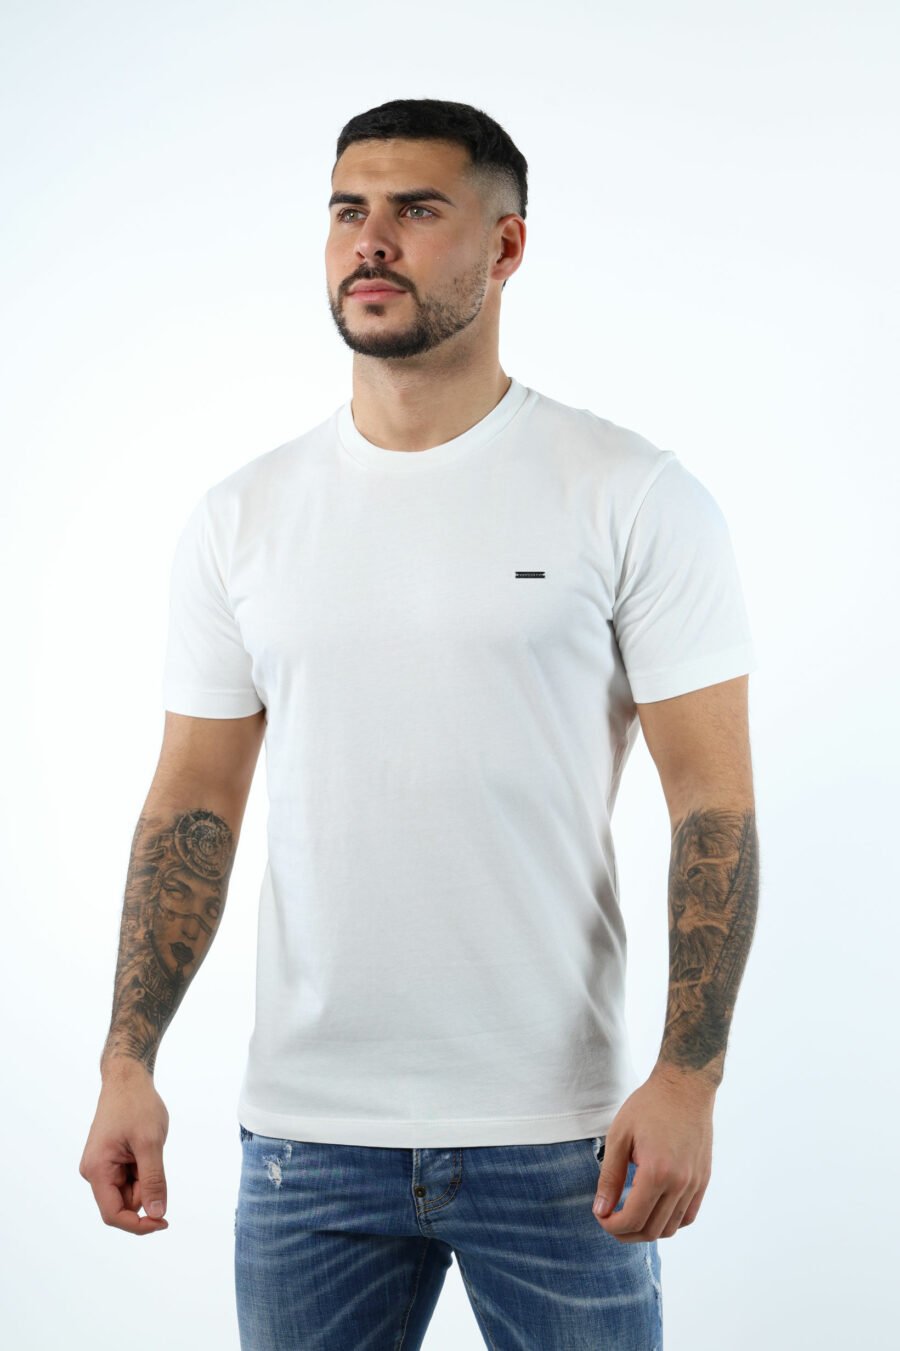 T-shirt white with logo on small plate - 106638